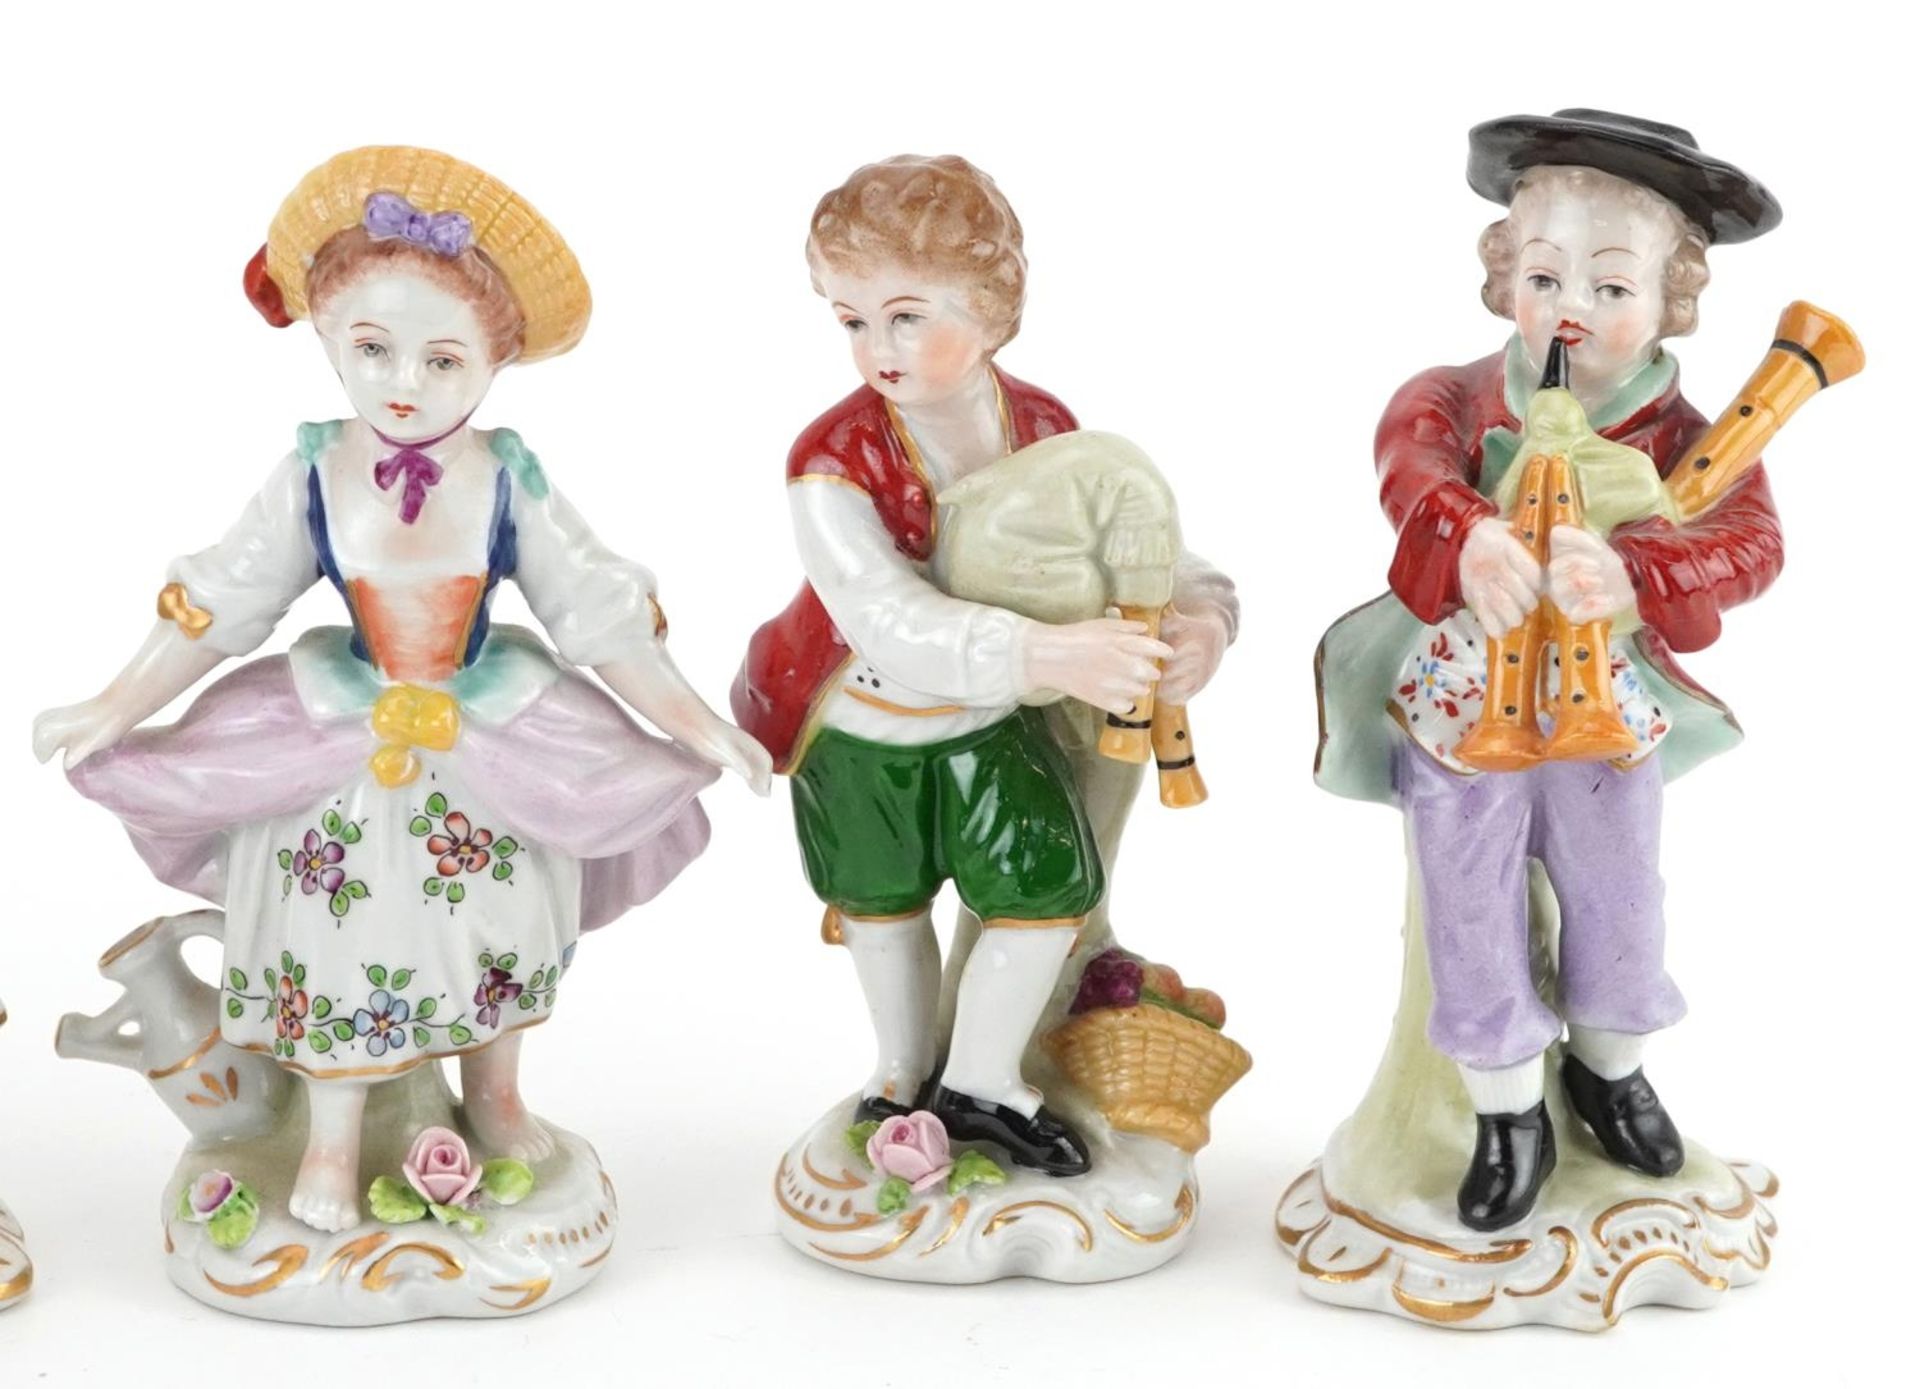 German porcelain comprising four Dresden figurines and a lace figurine in the form of a female on - Image 3 of 5